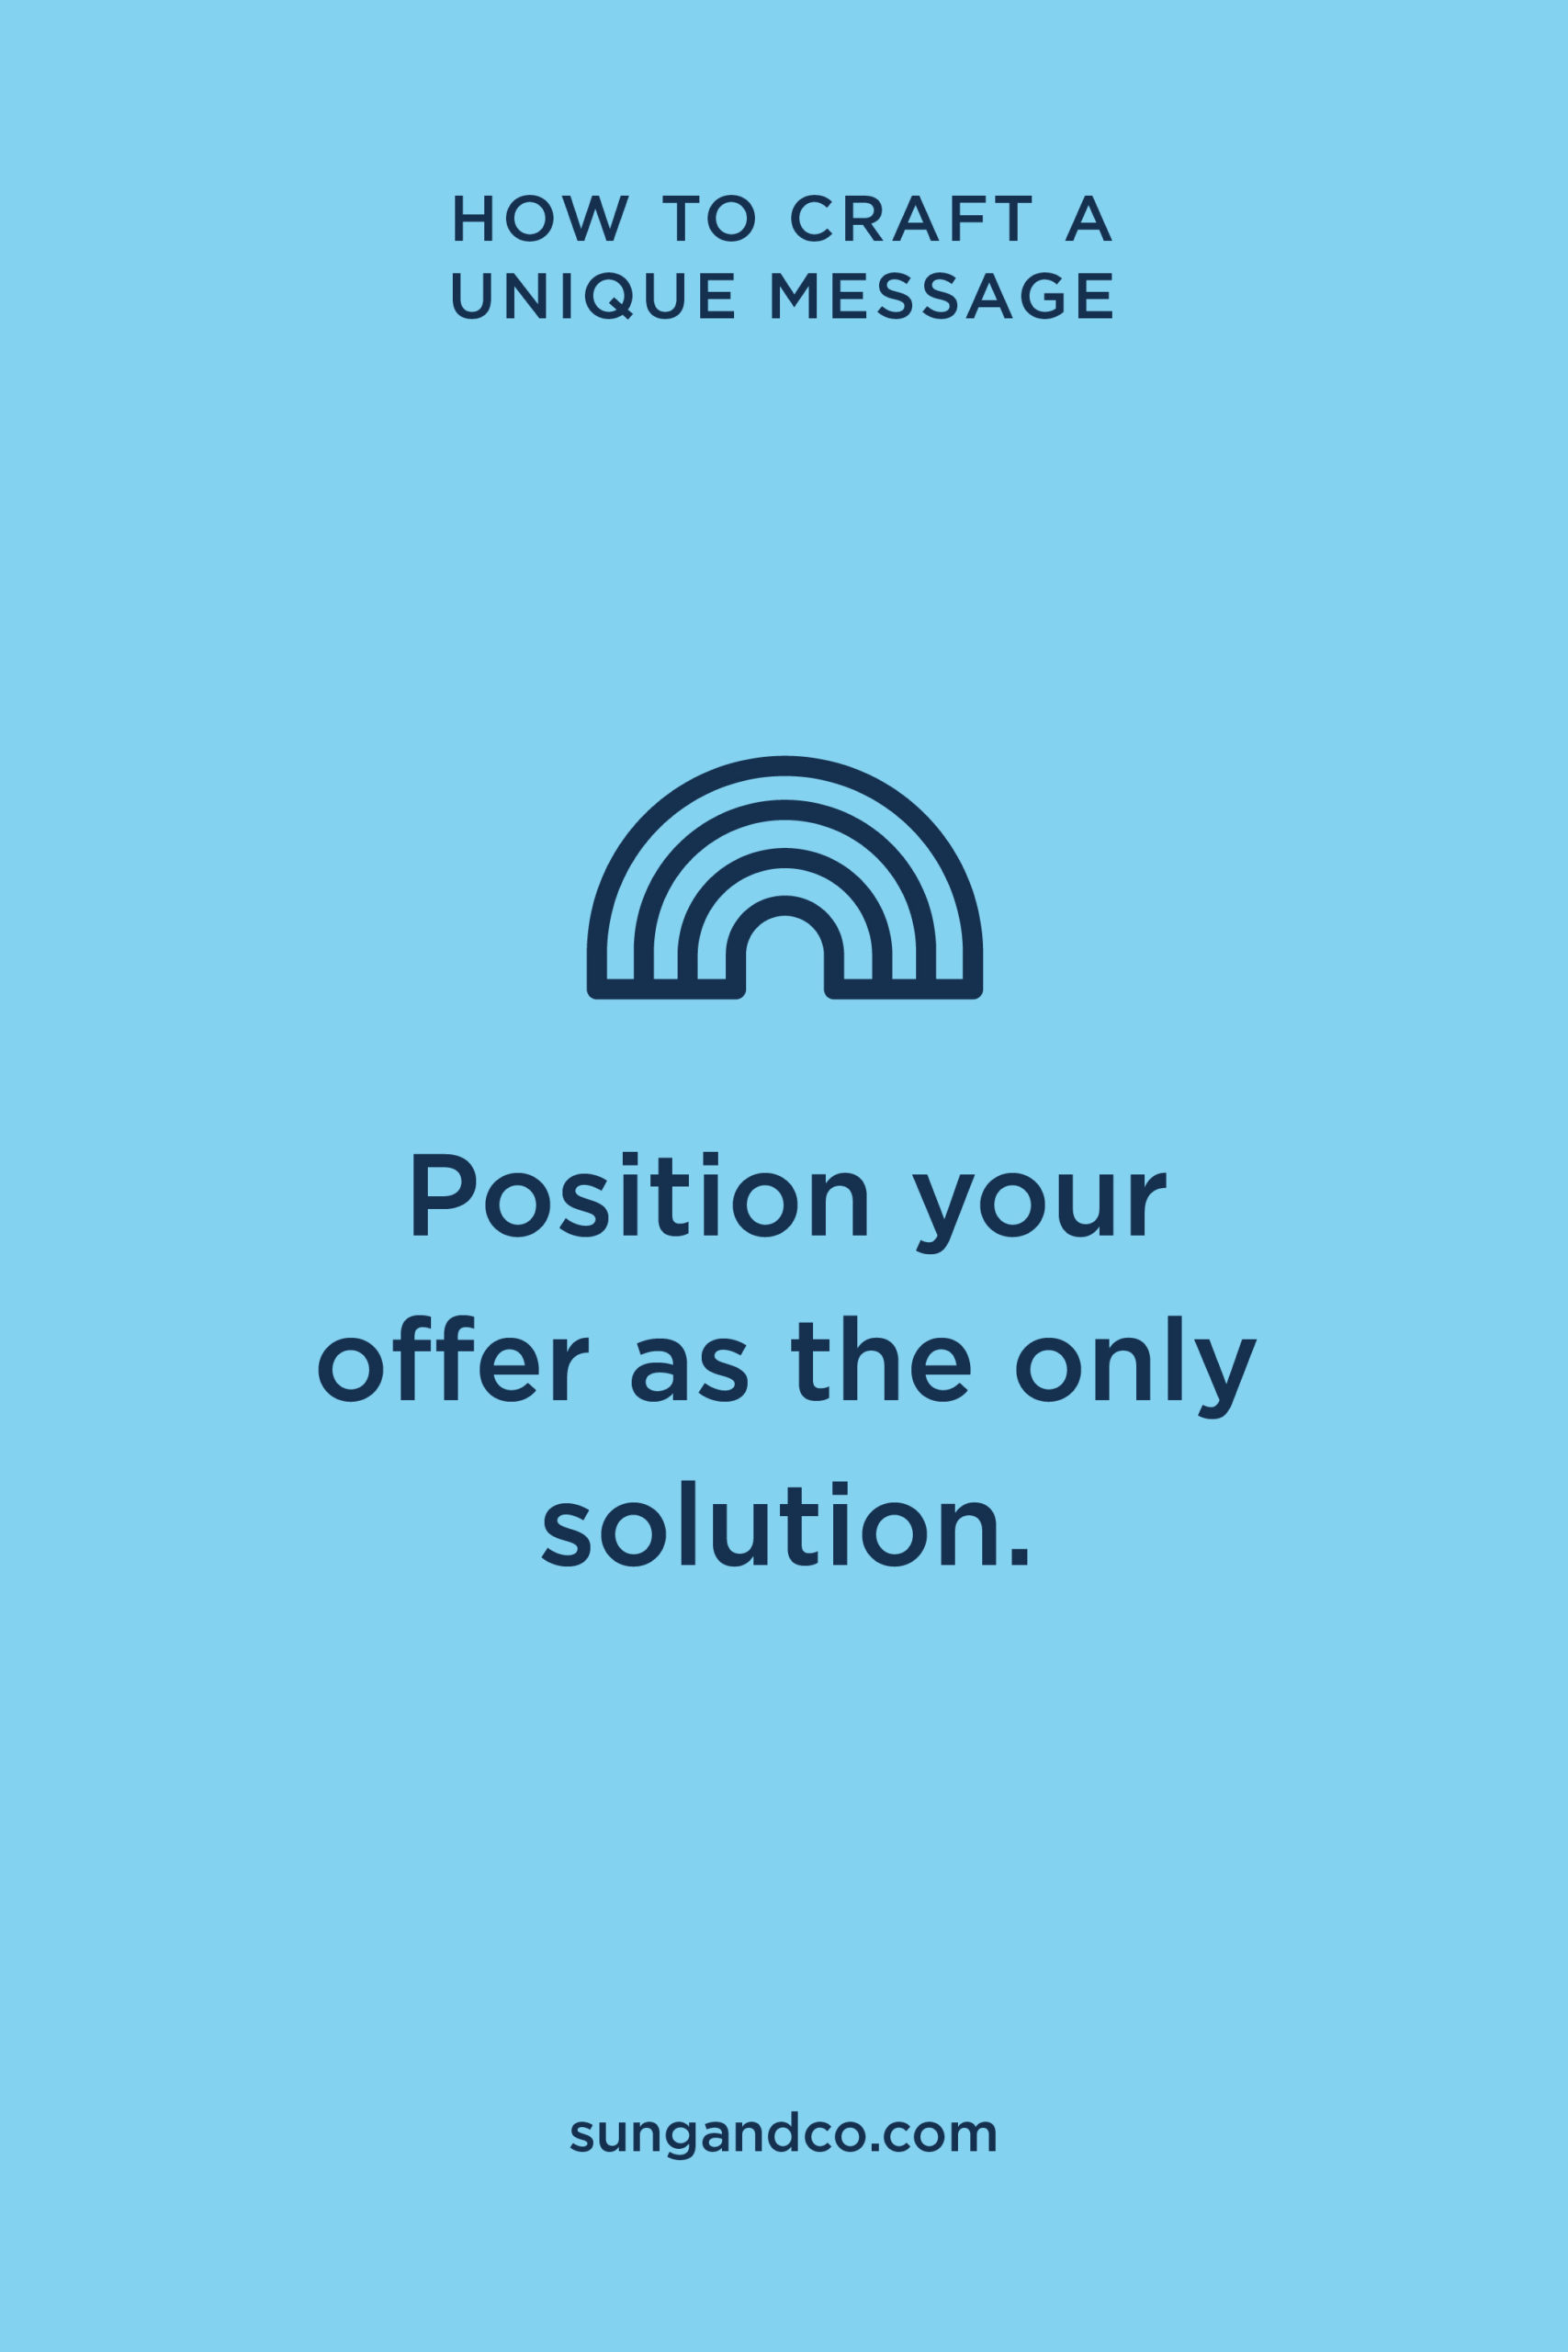 Position your offer as the only solution.